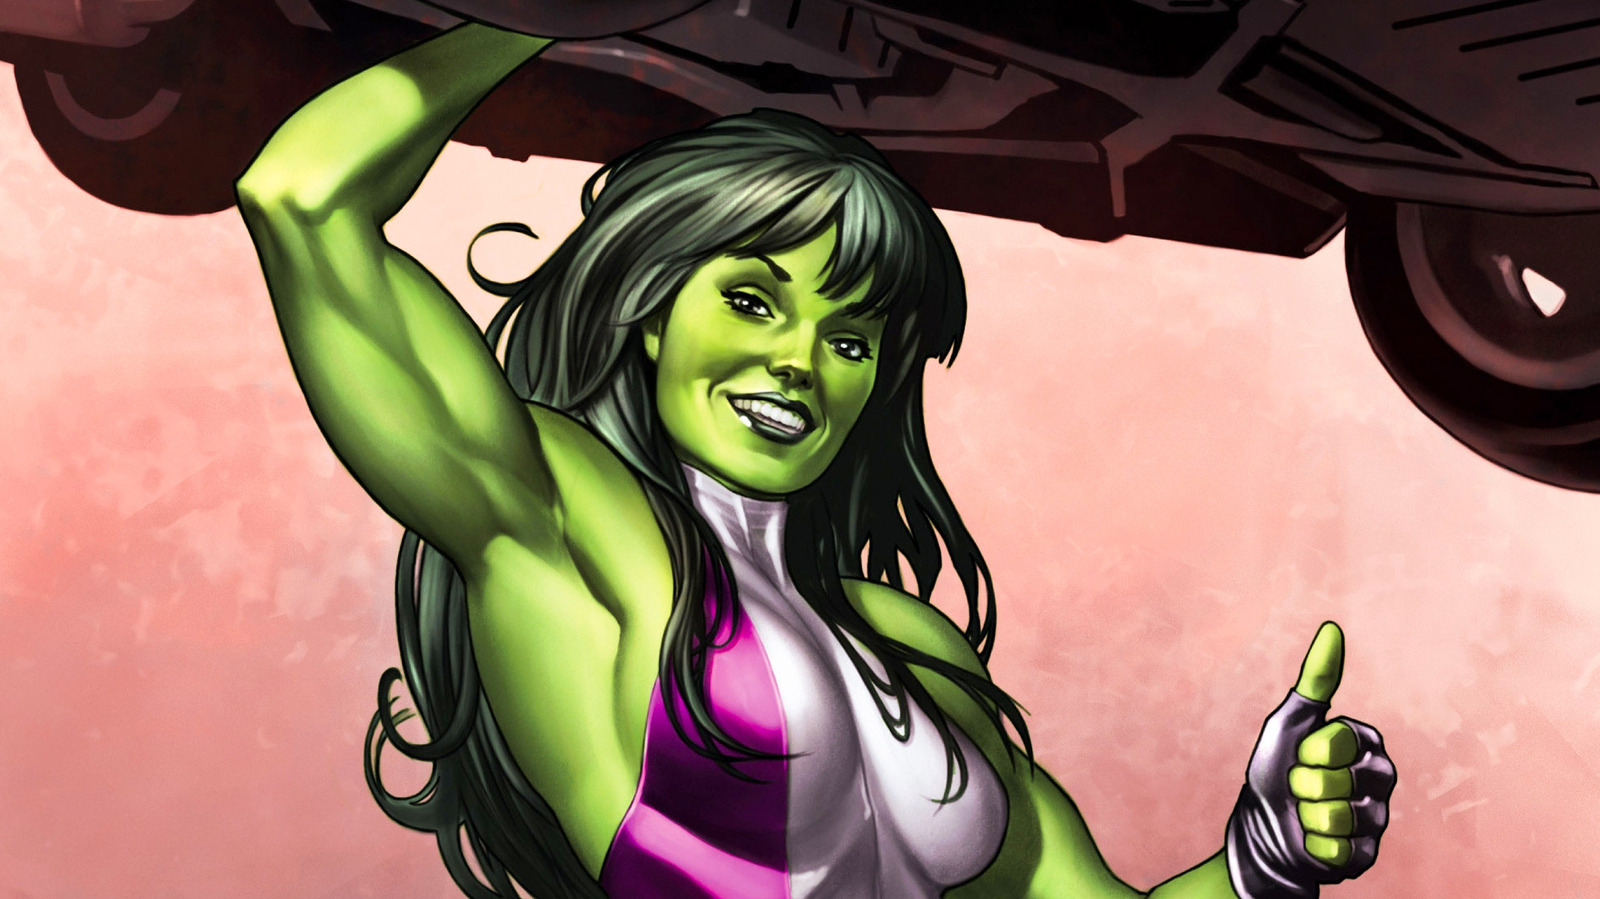 How is She-Hulk coming to the MCU? Does the movie rights for the